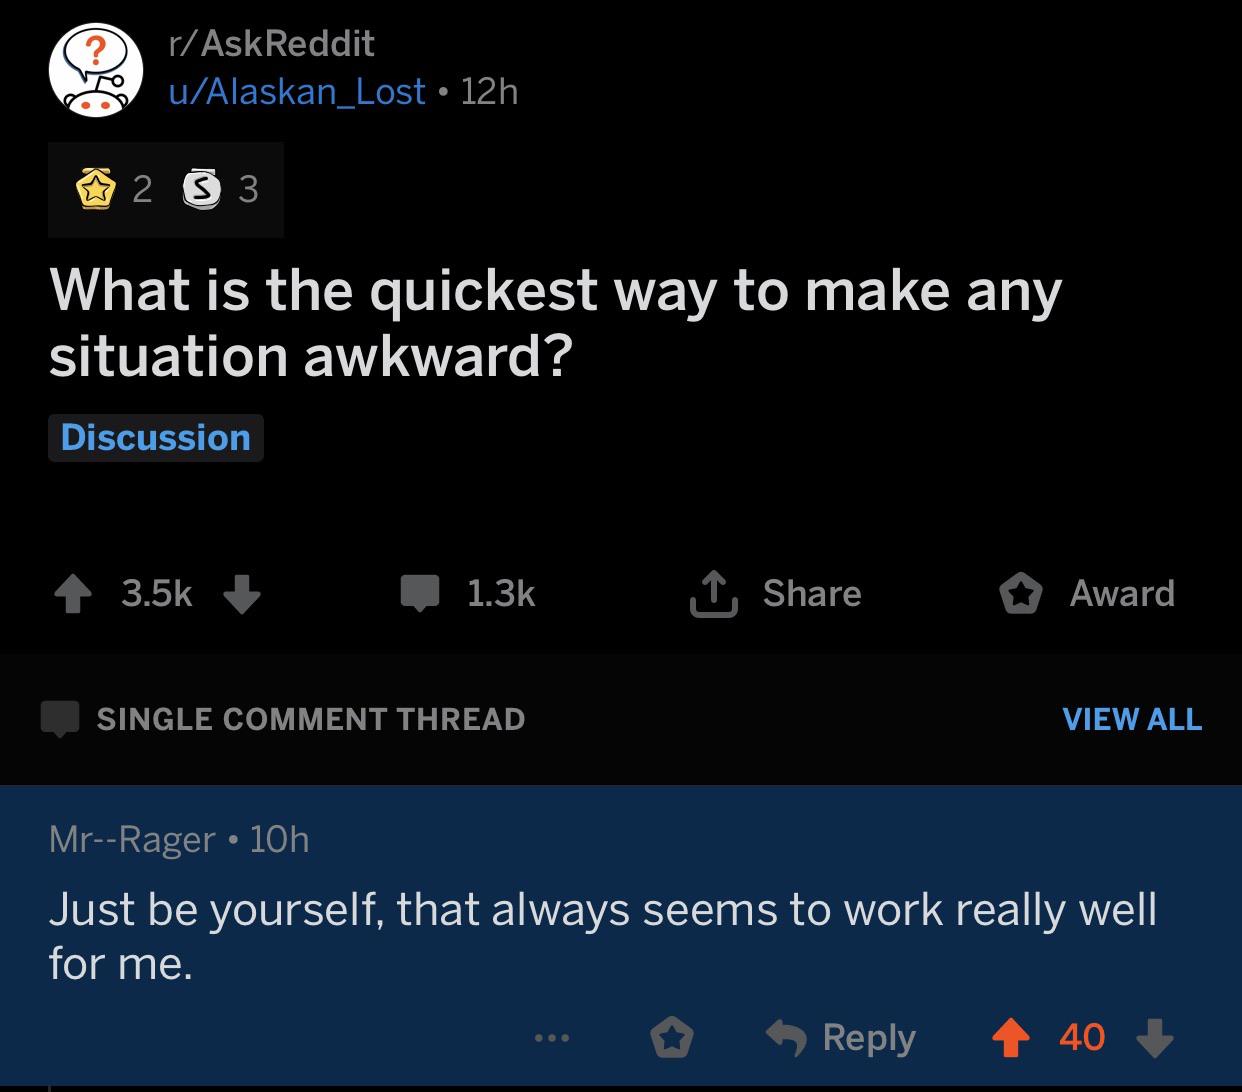 depression depression-memes depression text: r/AskReddit u/Alaskan Lost • 12h What is the quickest way to make any situation awkward? Discussion 1.3k SINGLE COMMENT THREAD Mr--Rager • 10h Share O Award VIEW ALL Just be yourself, that always seems to work really well for me. 0 9 Reply 40 + 